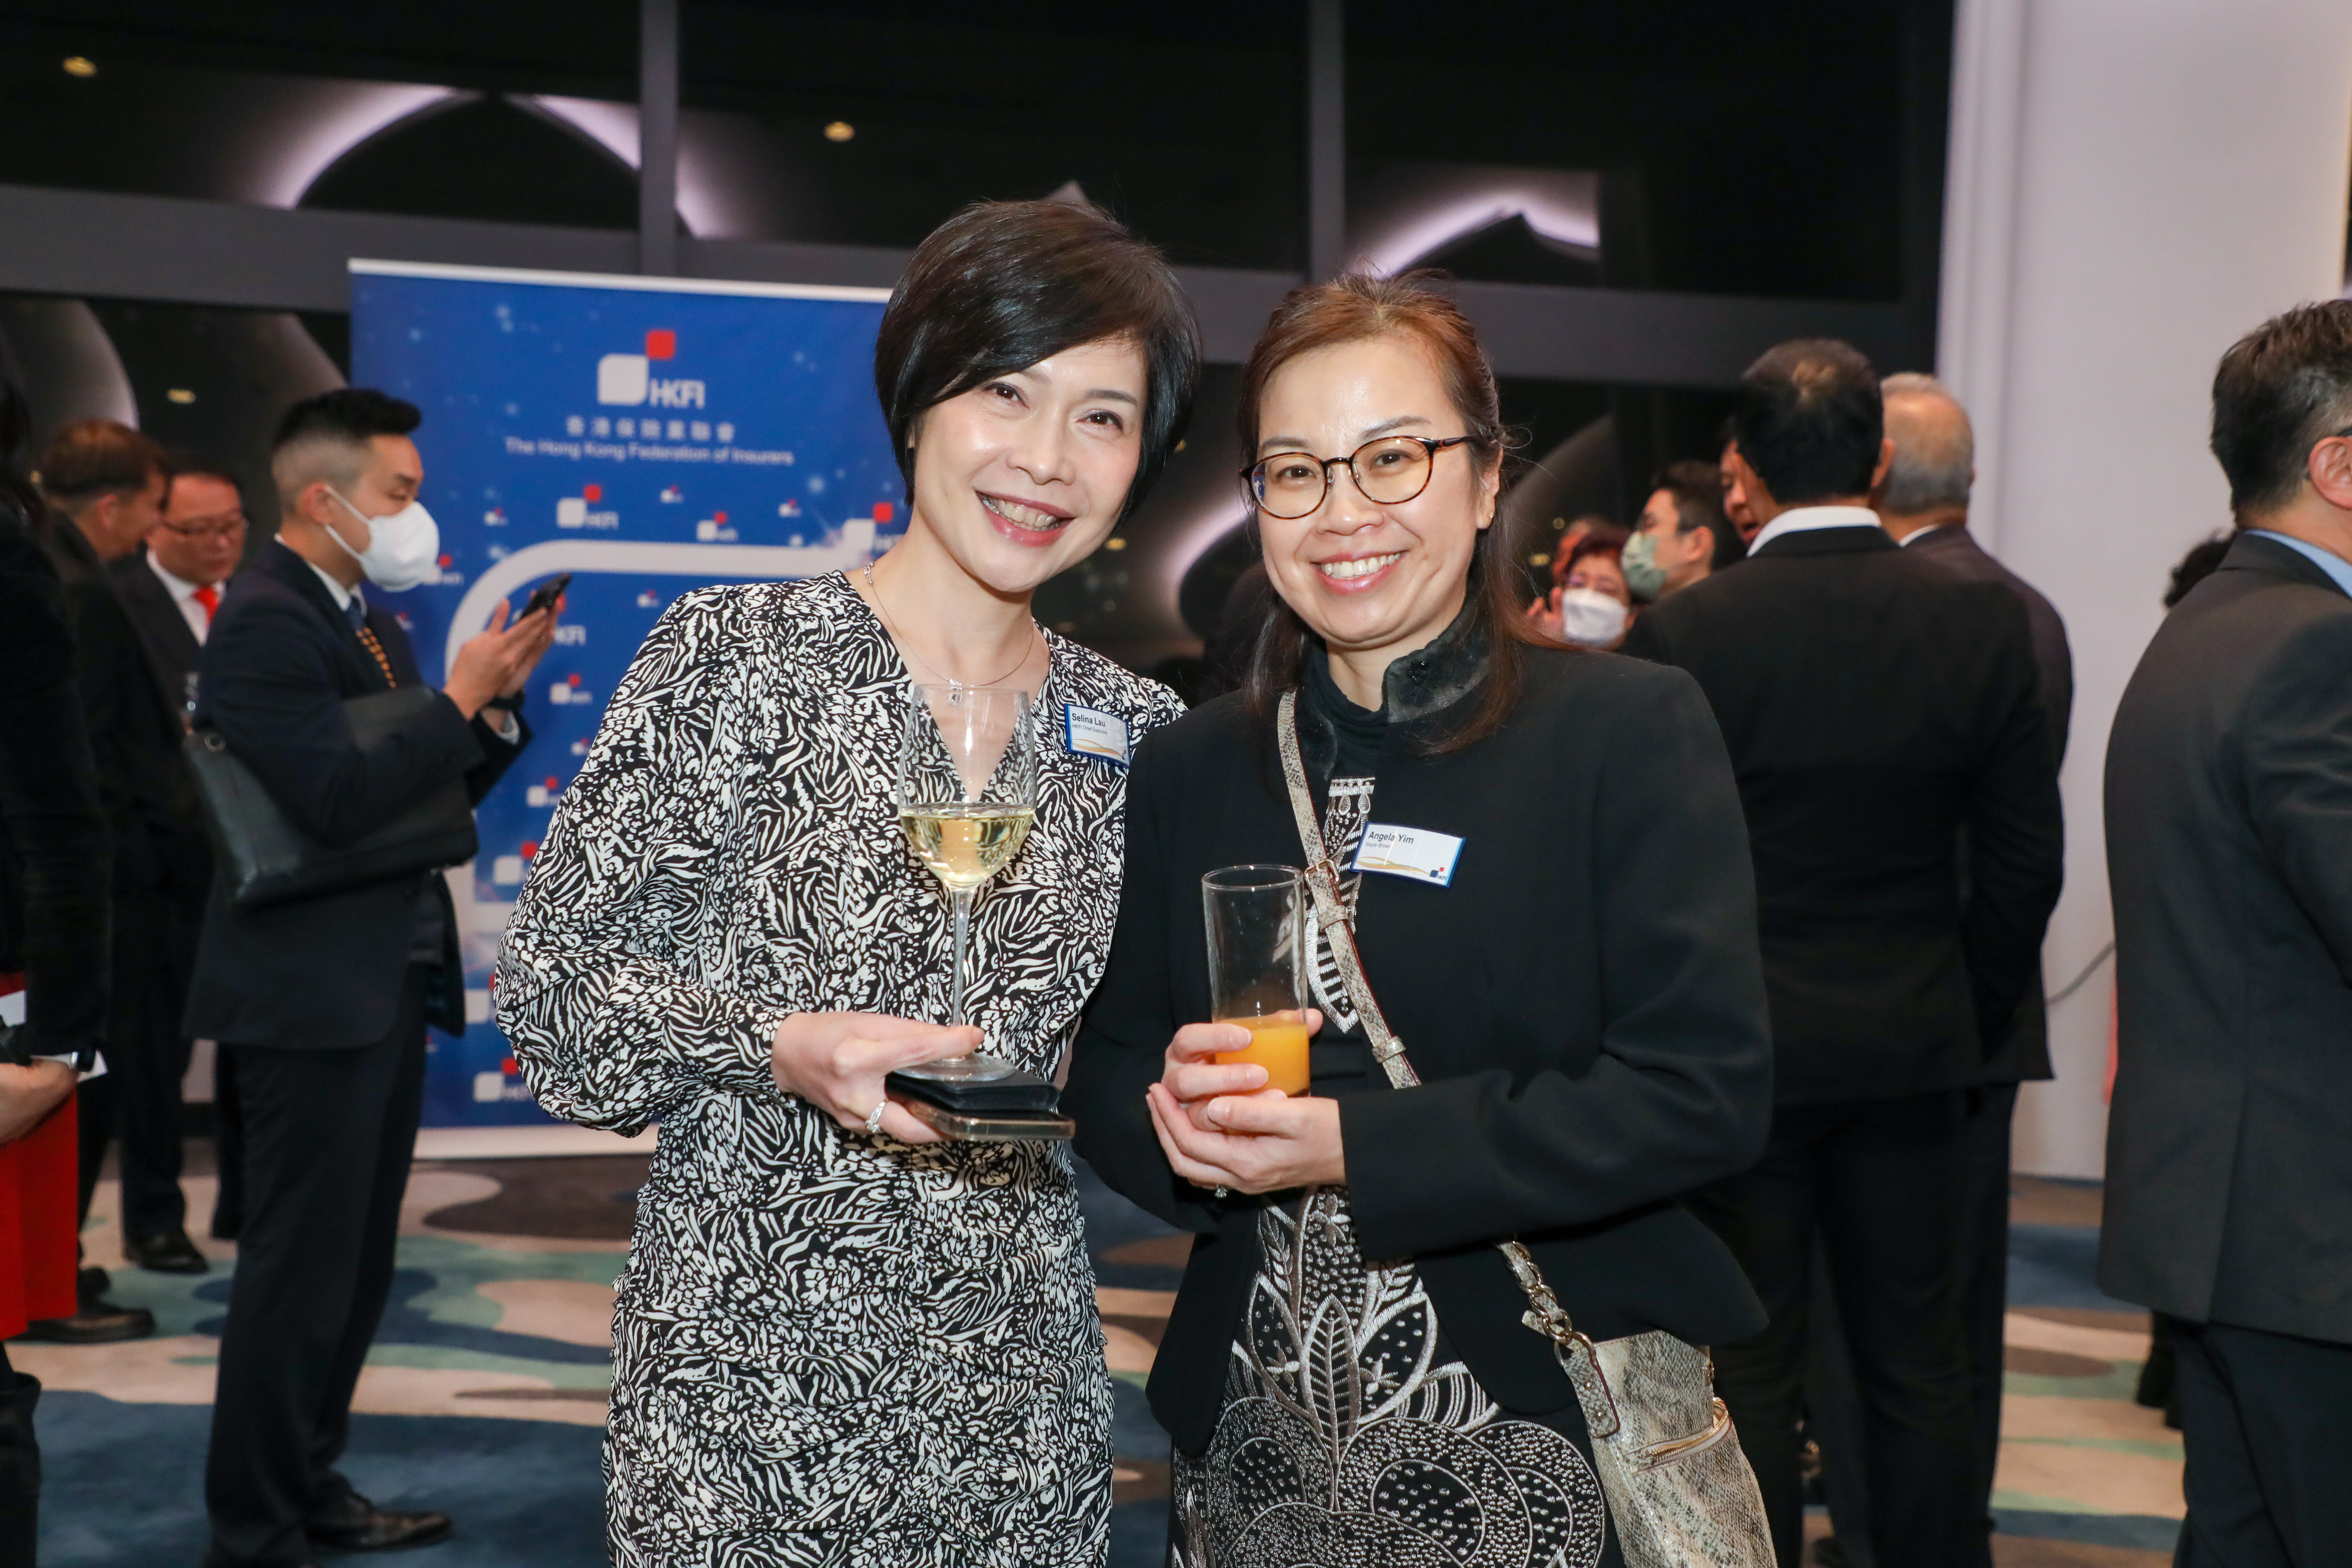 2022 Extraordinary General Meeting & Christmas Cocktail Party